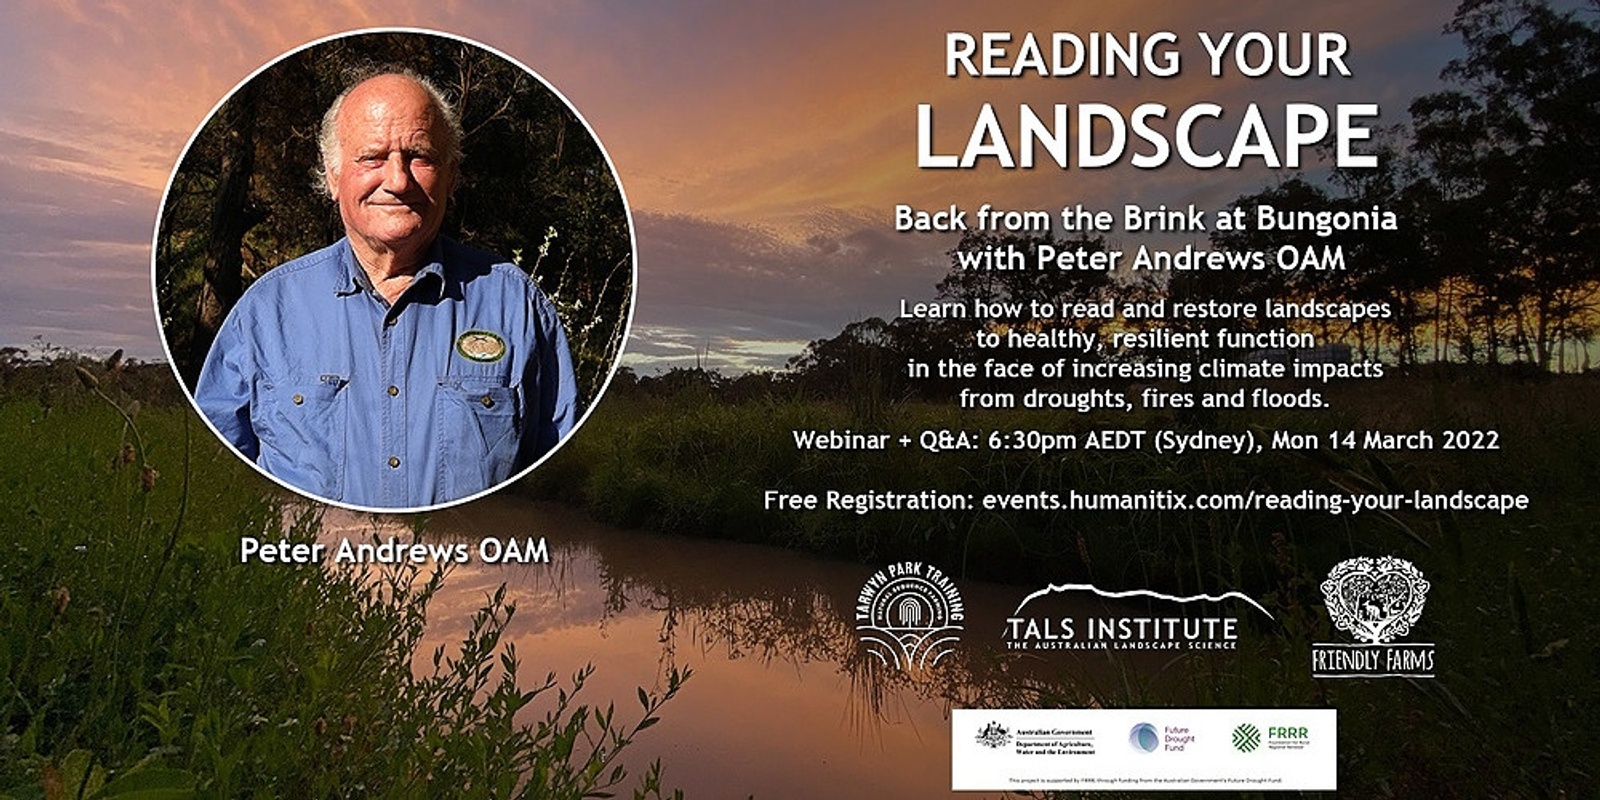 Banner image for Reading Your Landscape - Back from the Brink with Peter Andrews OAM at Bungonia